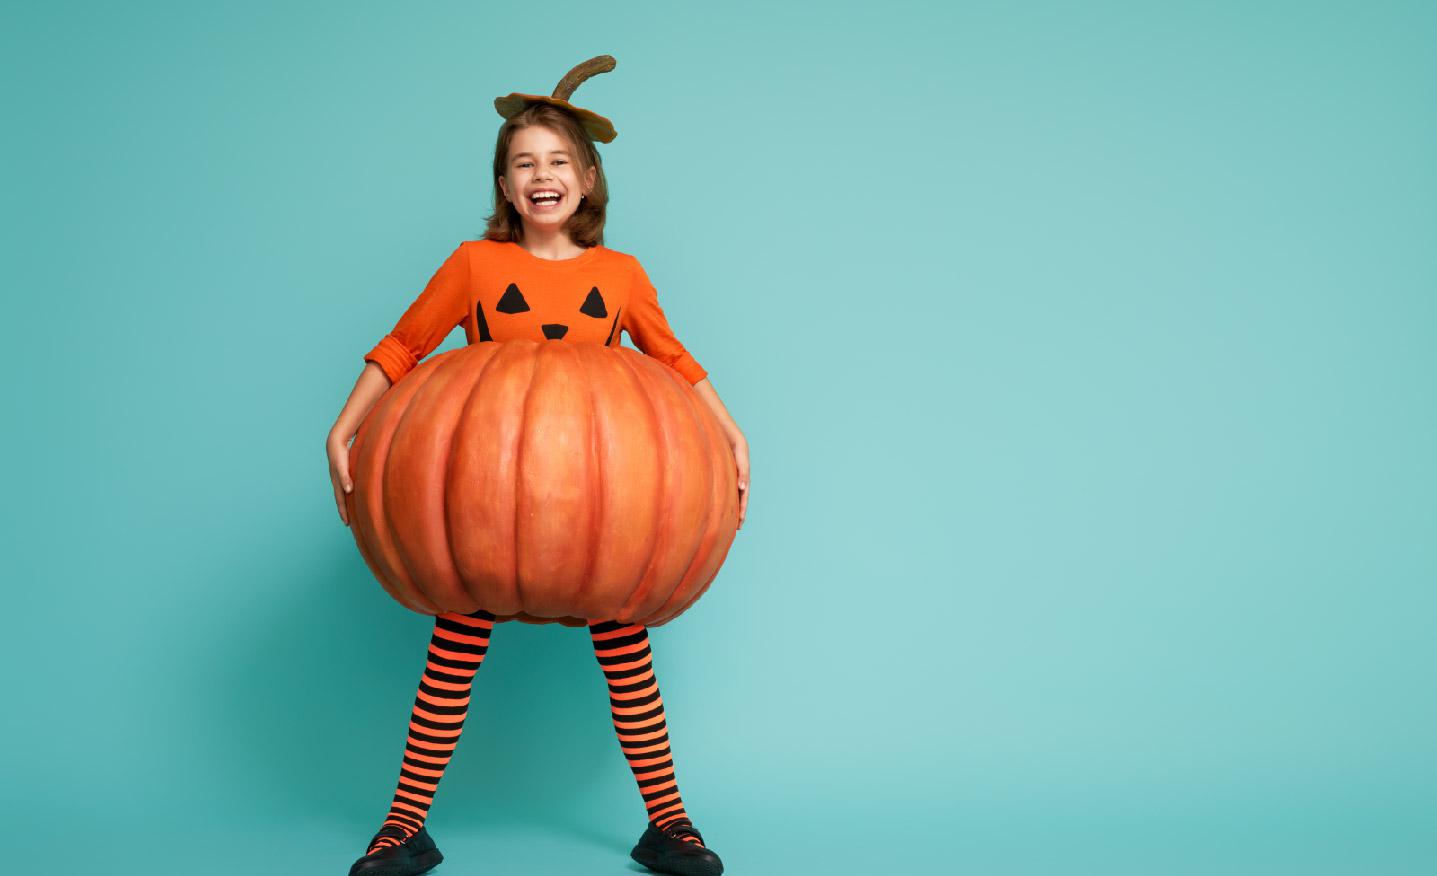 Fancy dress competition: DIY fruits and vegetables costume ideas kids will love